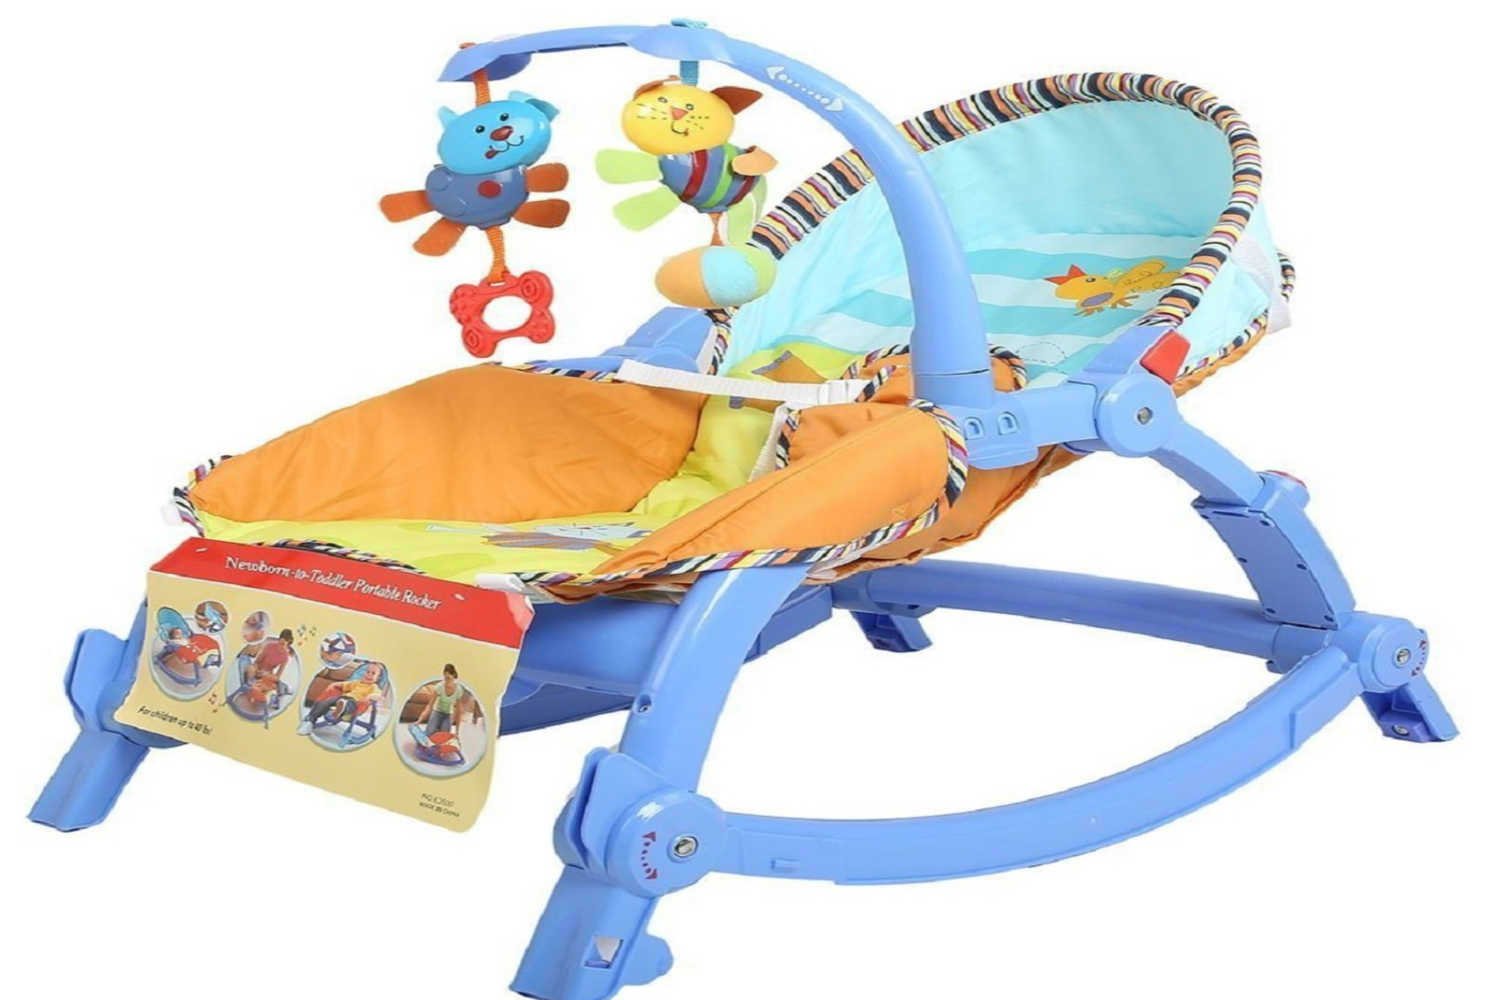 The Flyers Bay New-Born to Toddler Portable Rocker